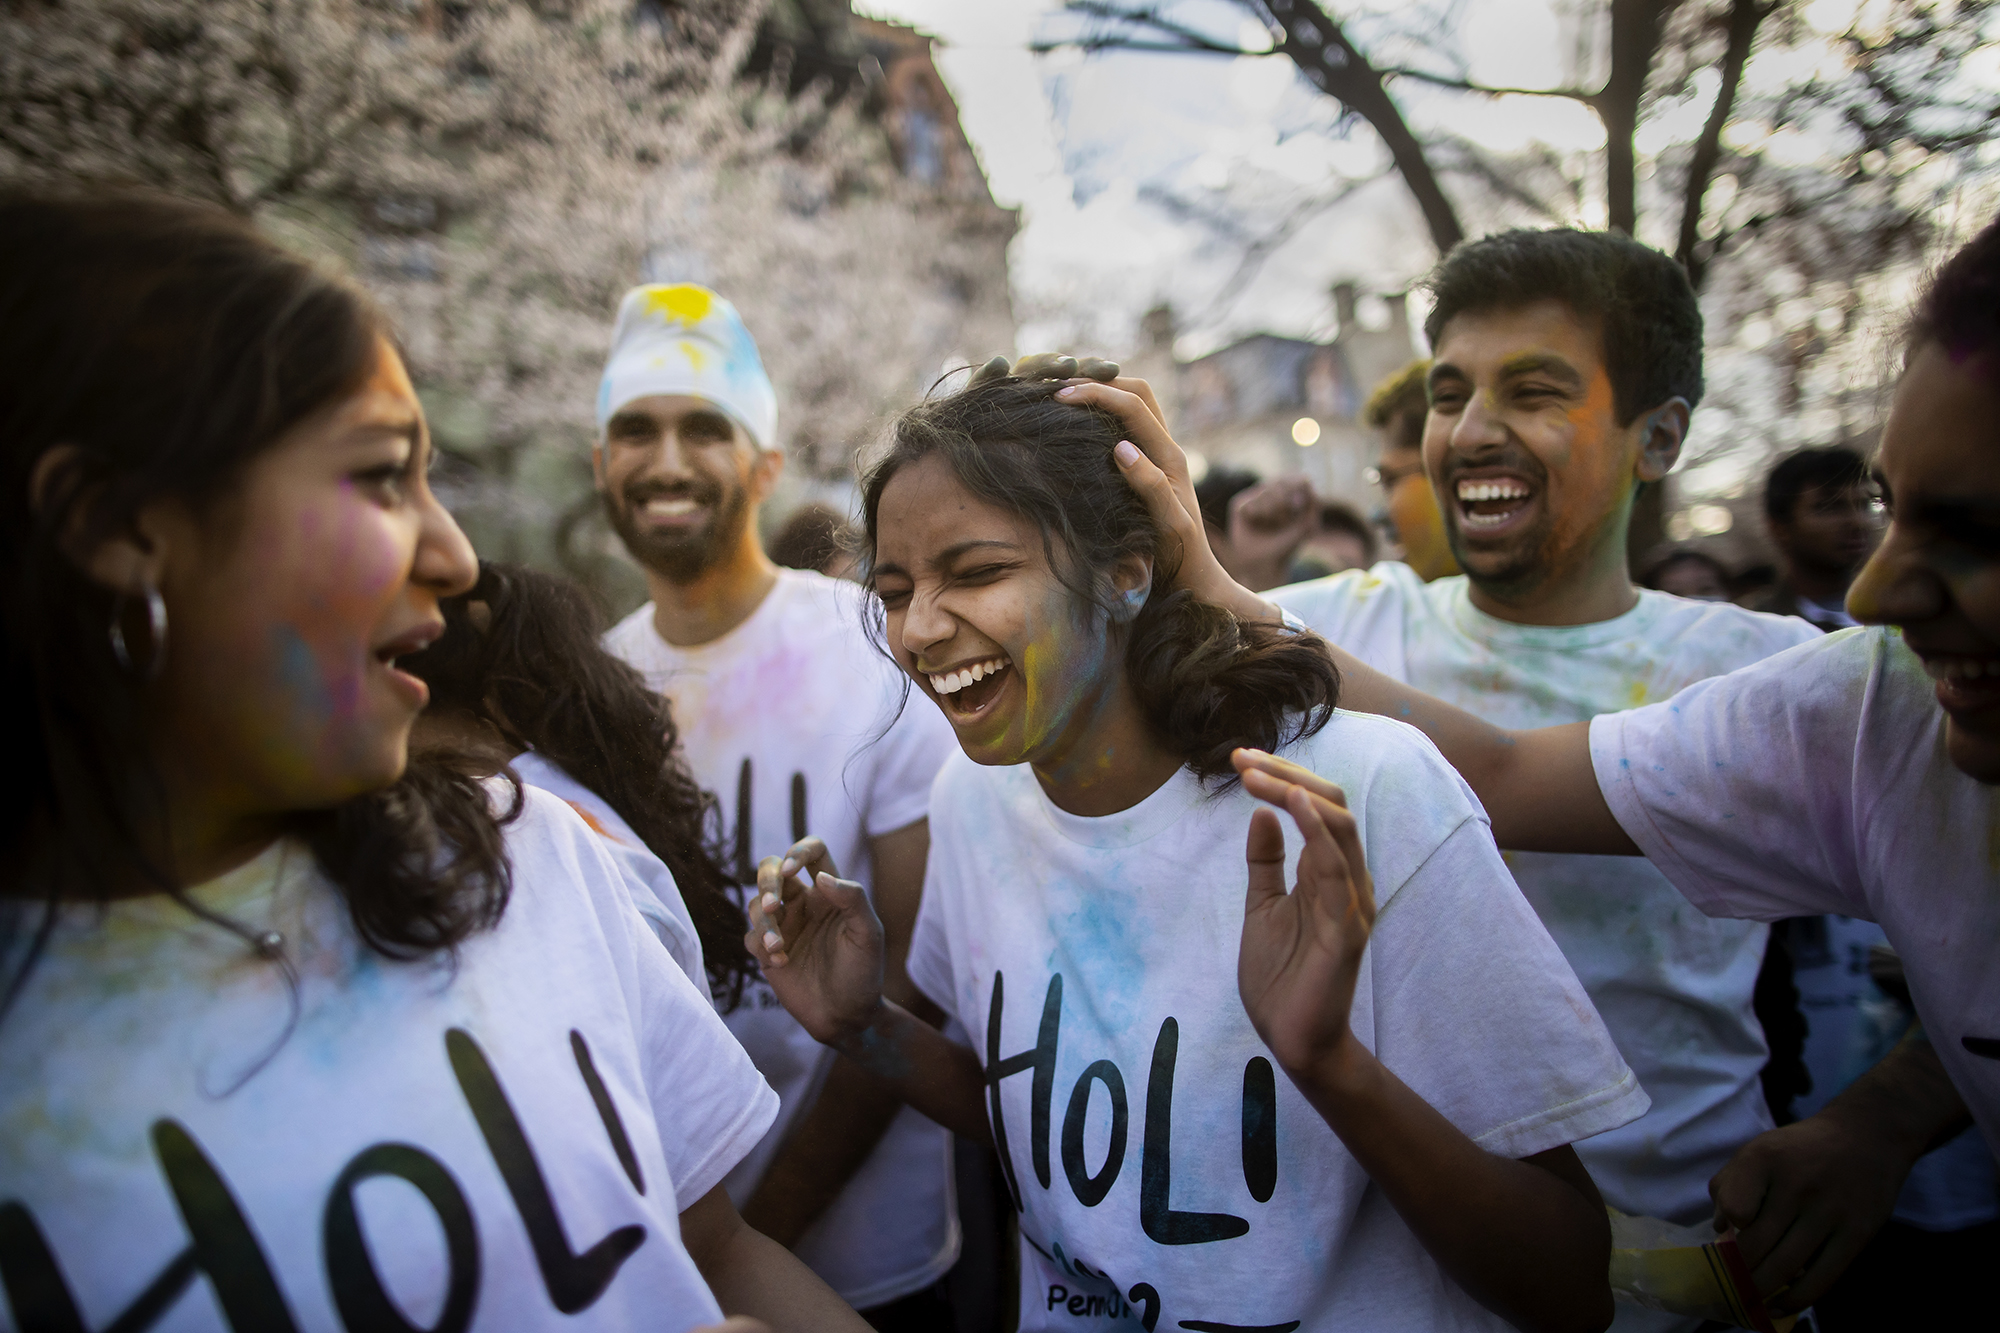 A crowd of people on College Green celebrating Holi with colorful powders.